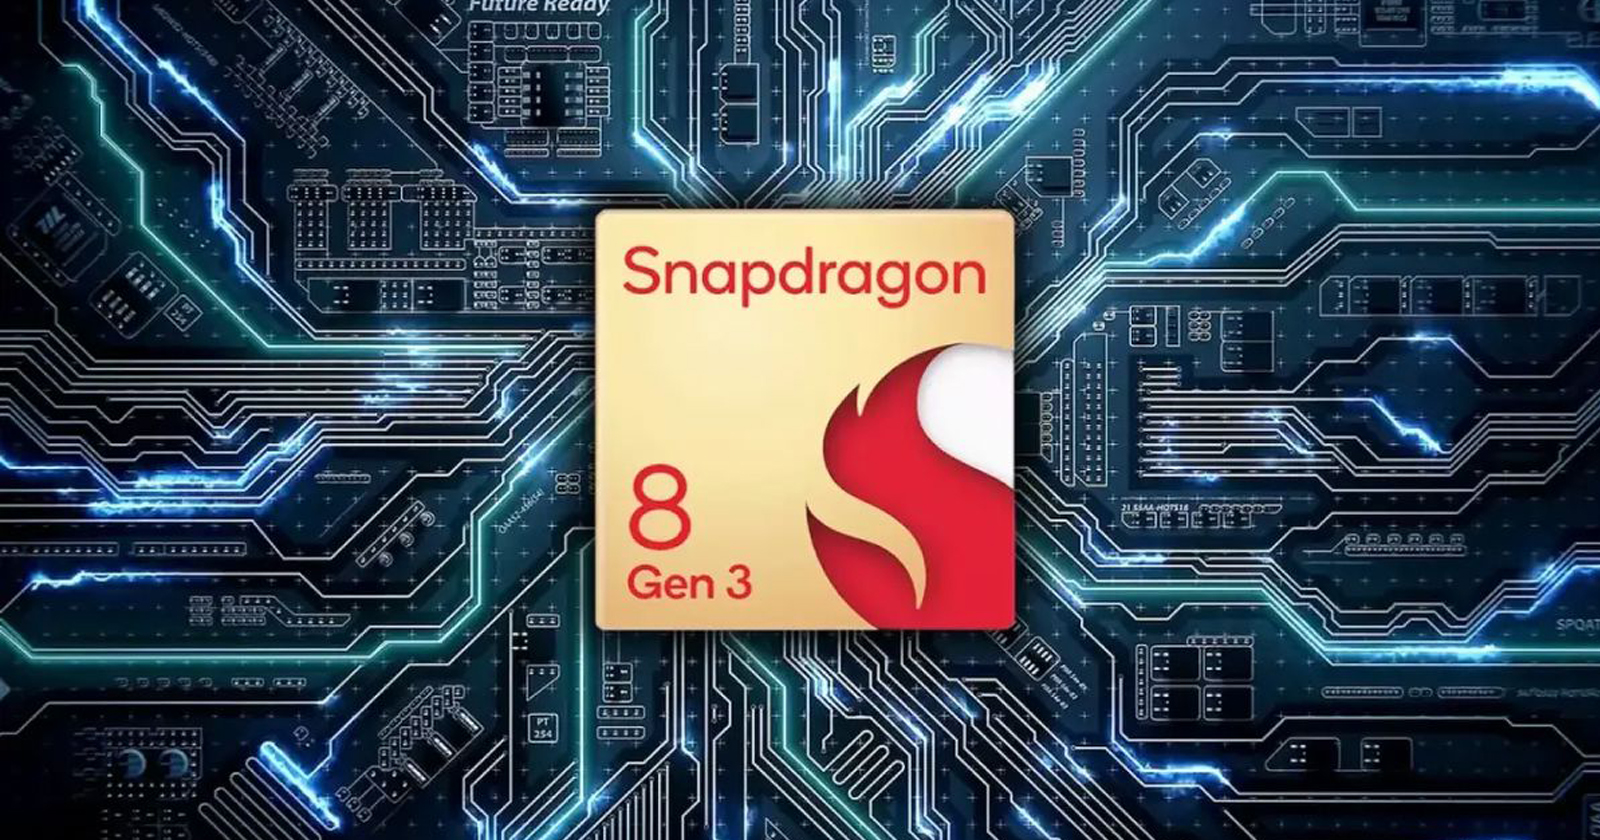 Snapdragon 8 Gen 3 Estimated To Cost $200 for Qualcomm's Partners